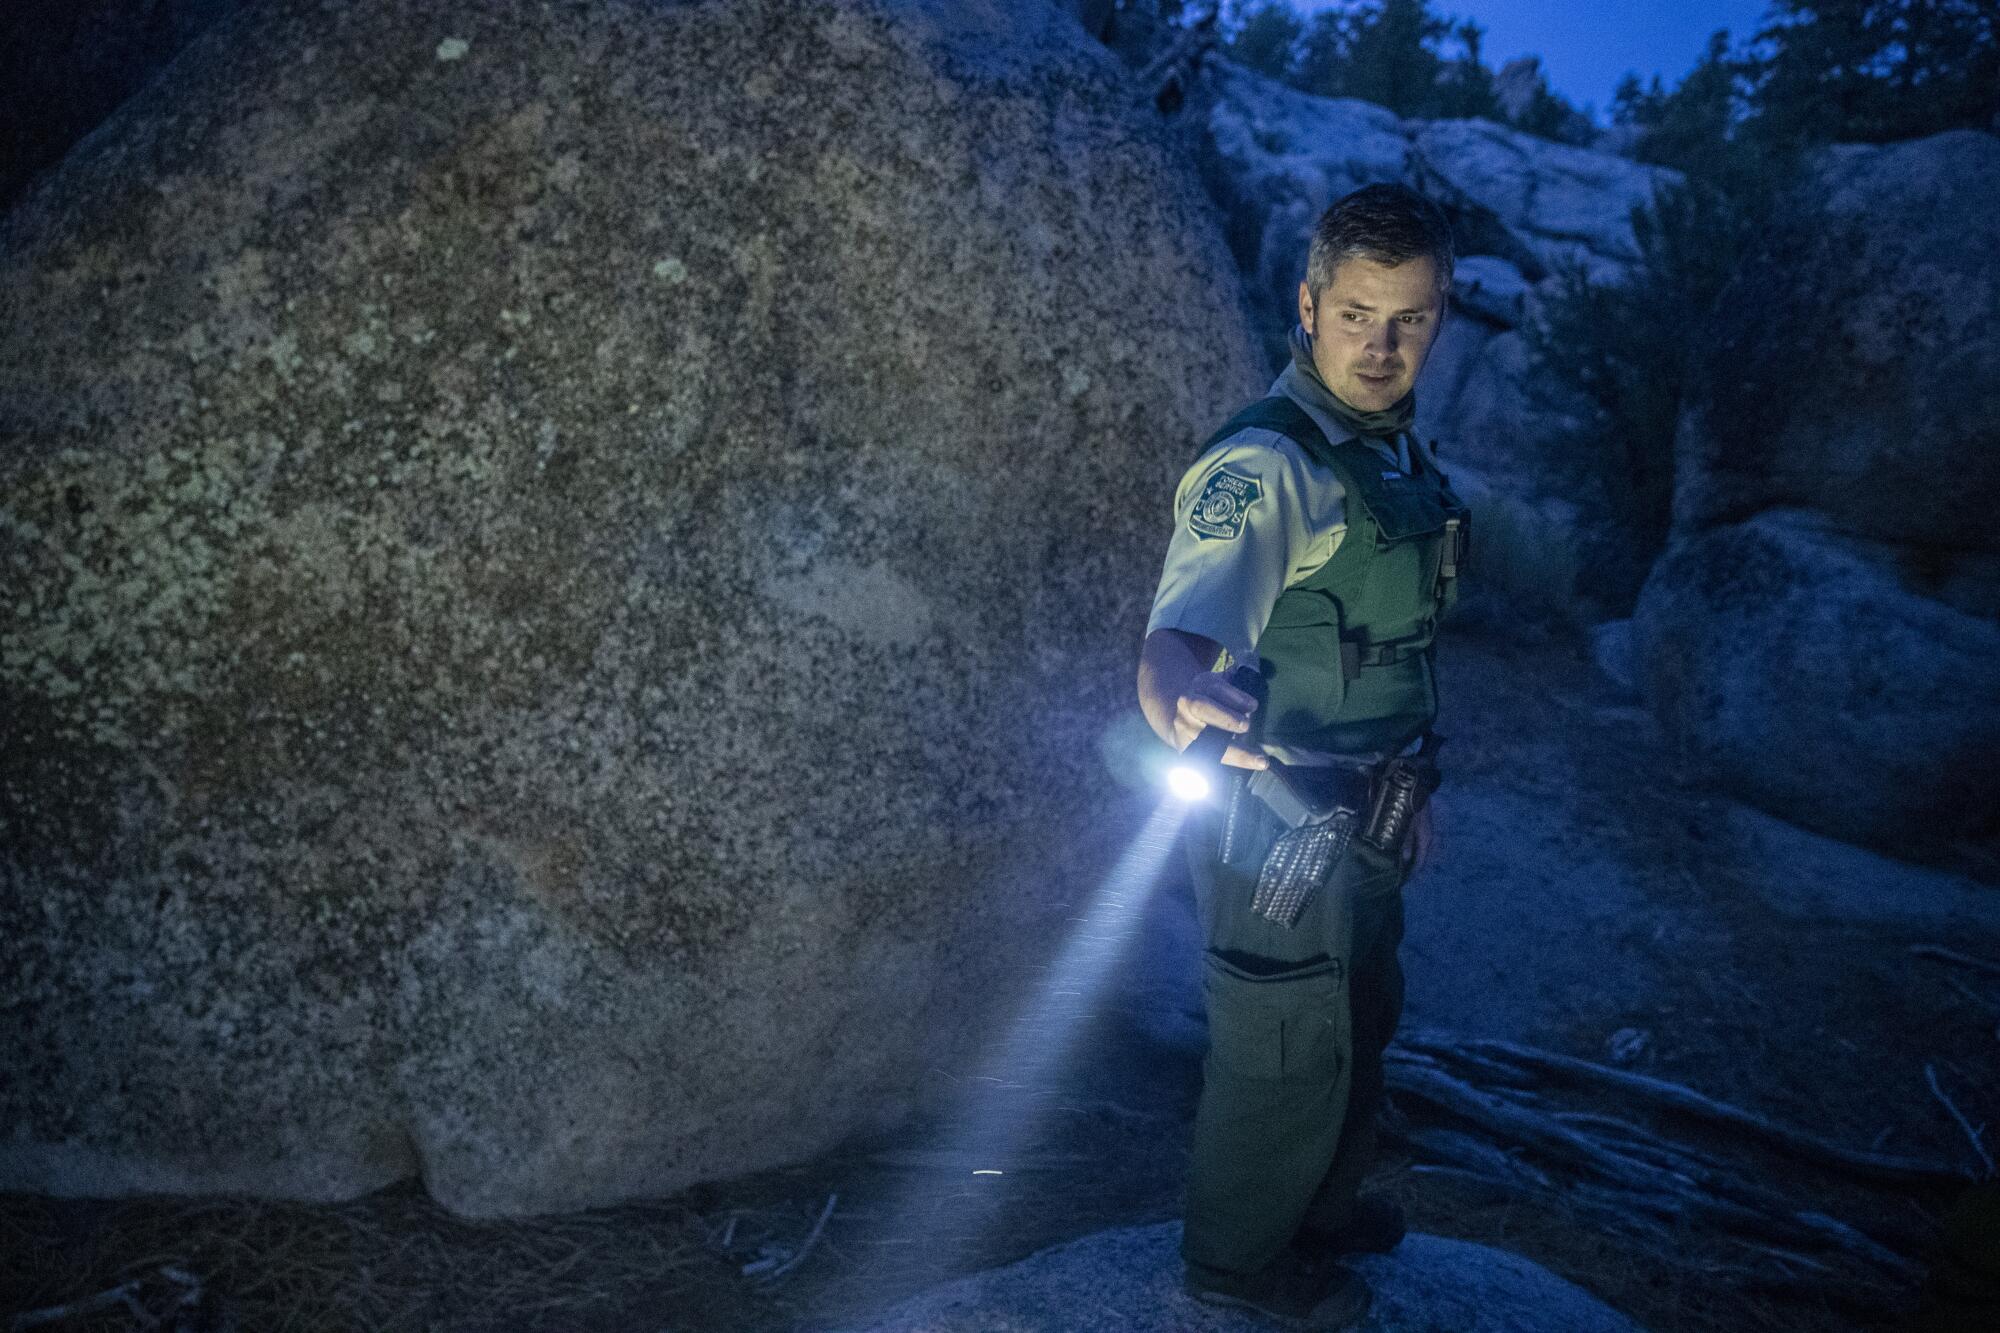  Forest service law enforcement officer Tyler Smith looks for evidence of illegal camping while on patrol 